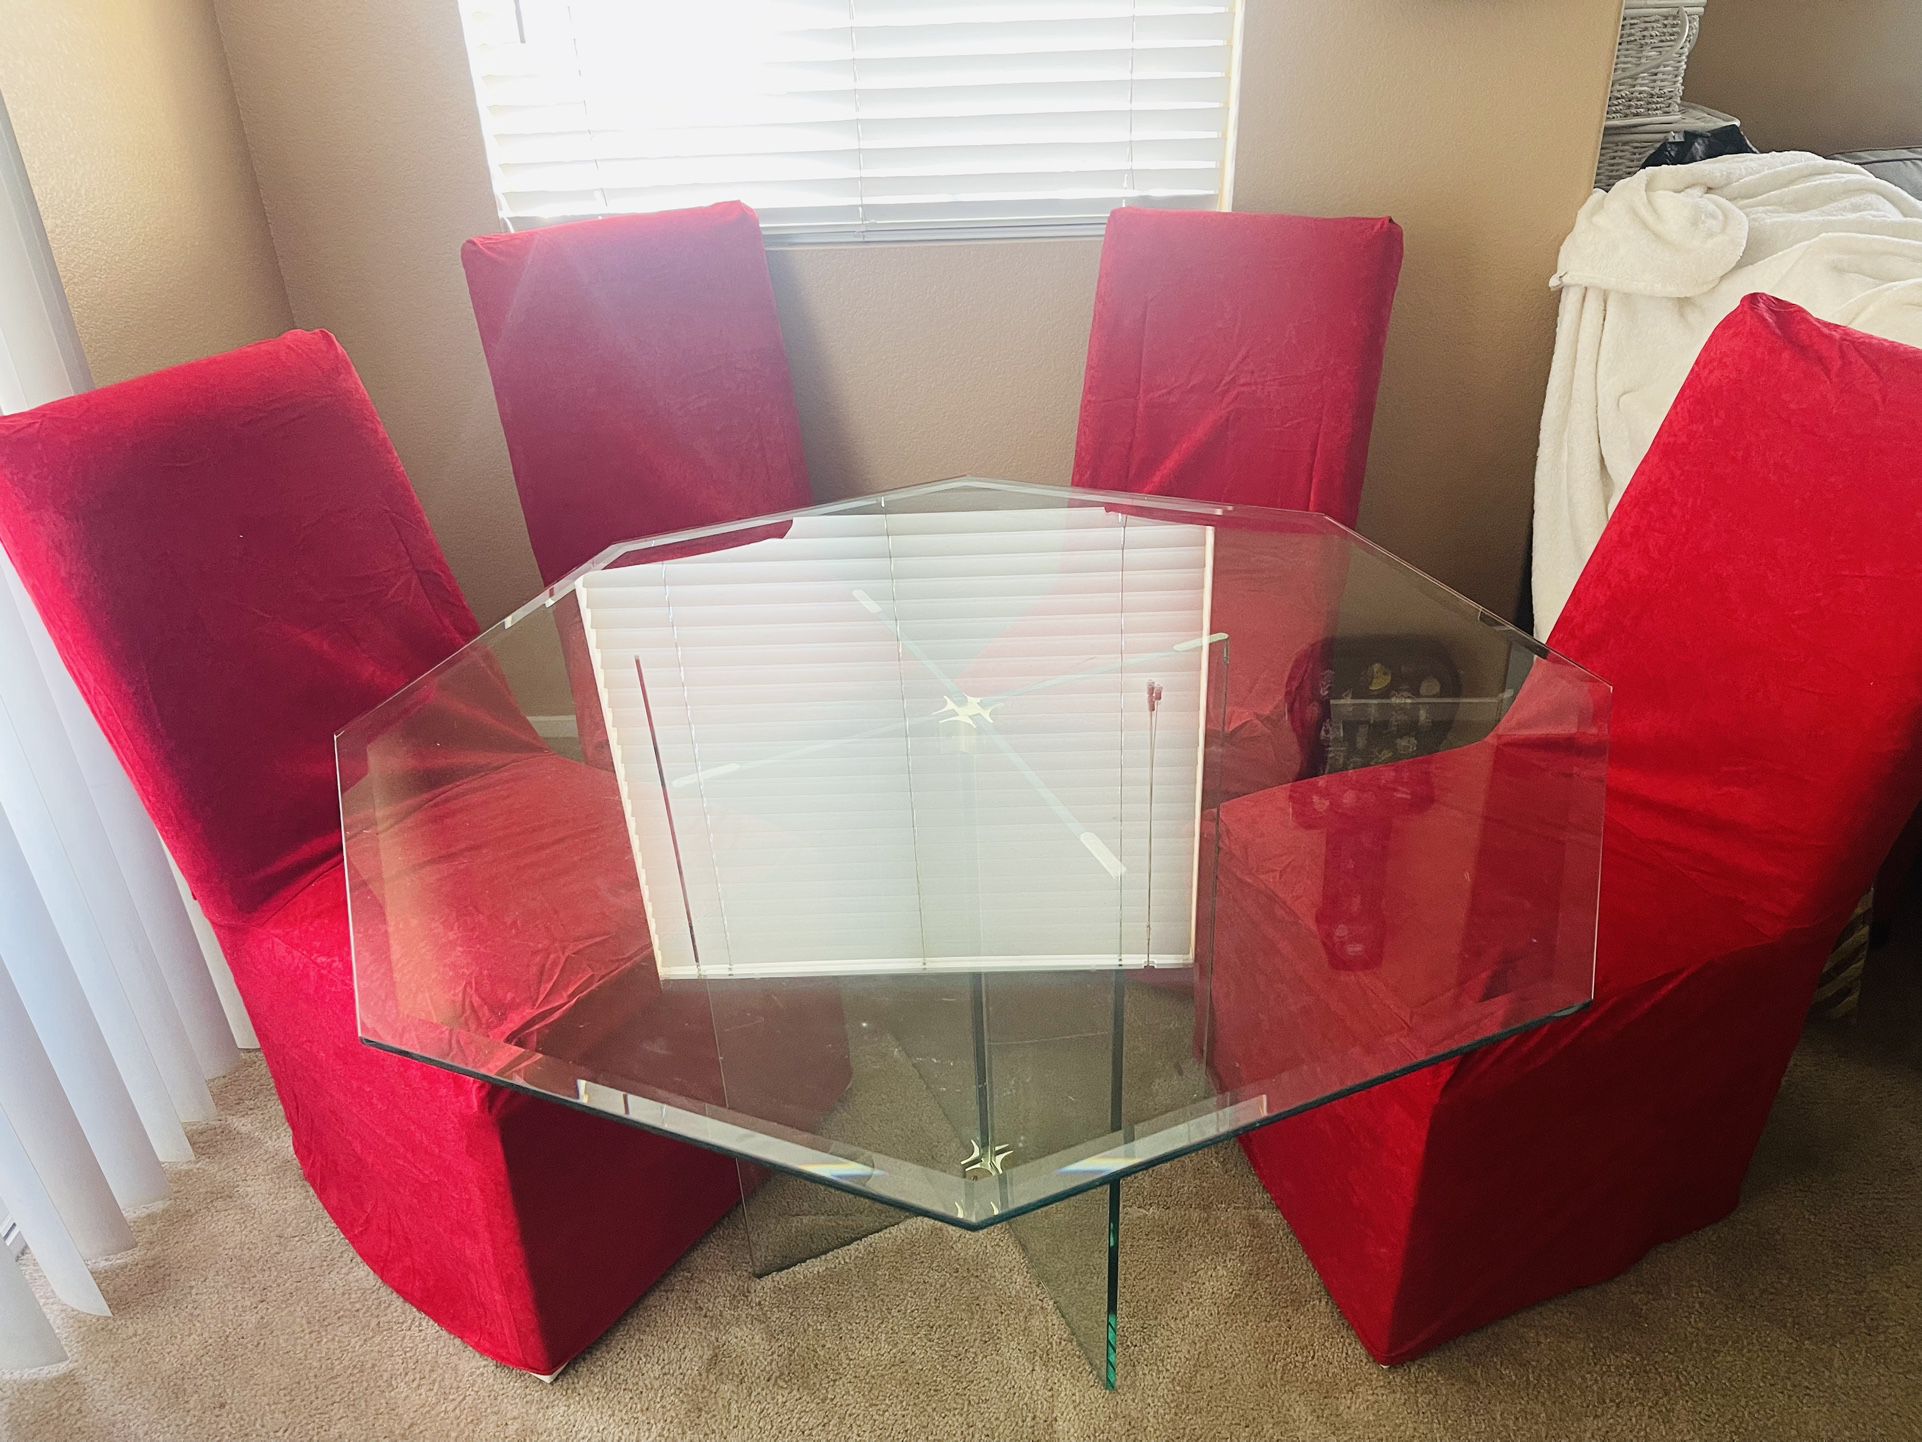 Glass Table & 4 Chairs With Red And Tan Chair Covers